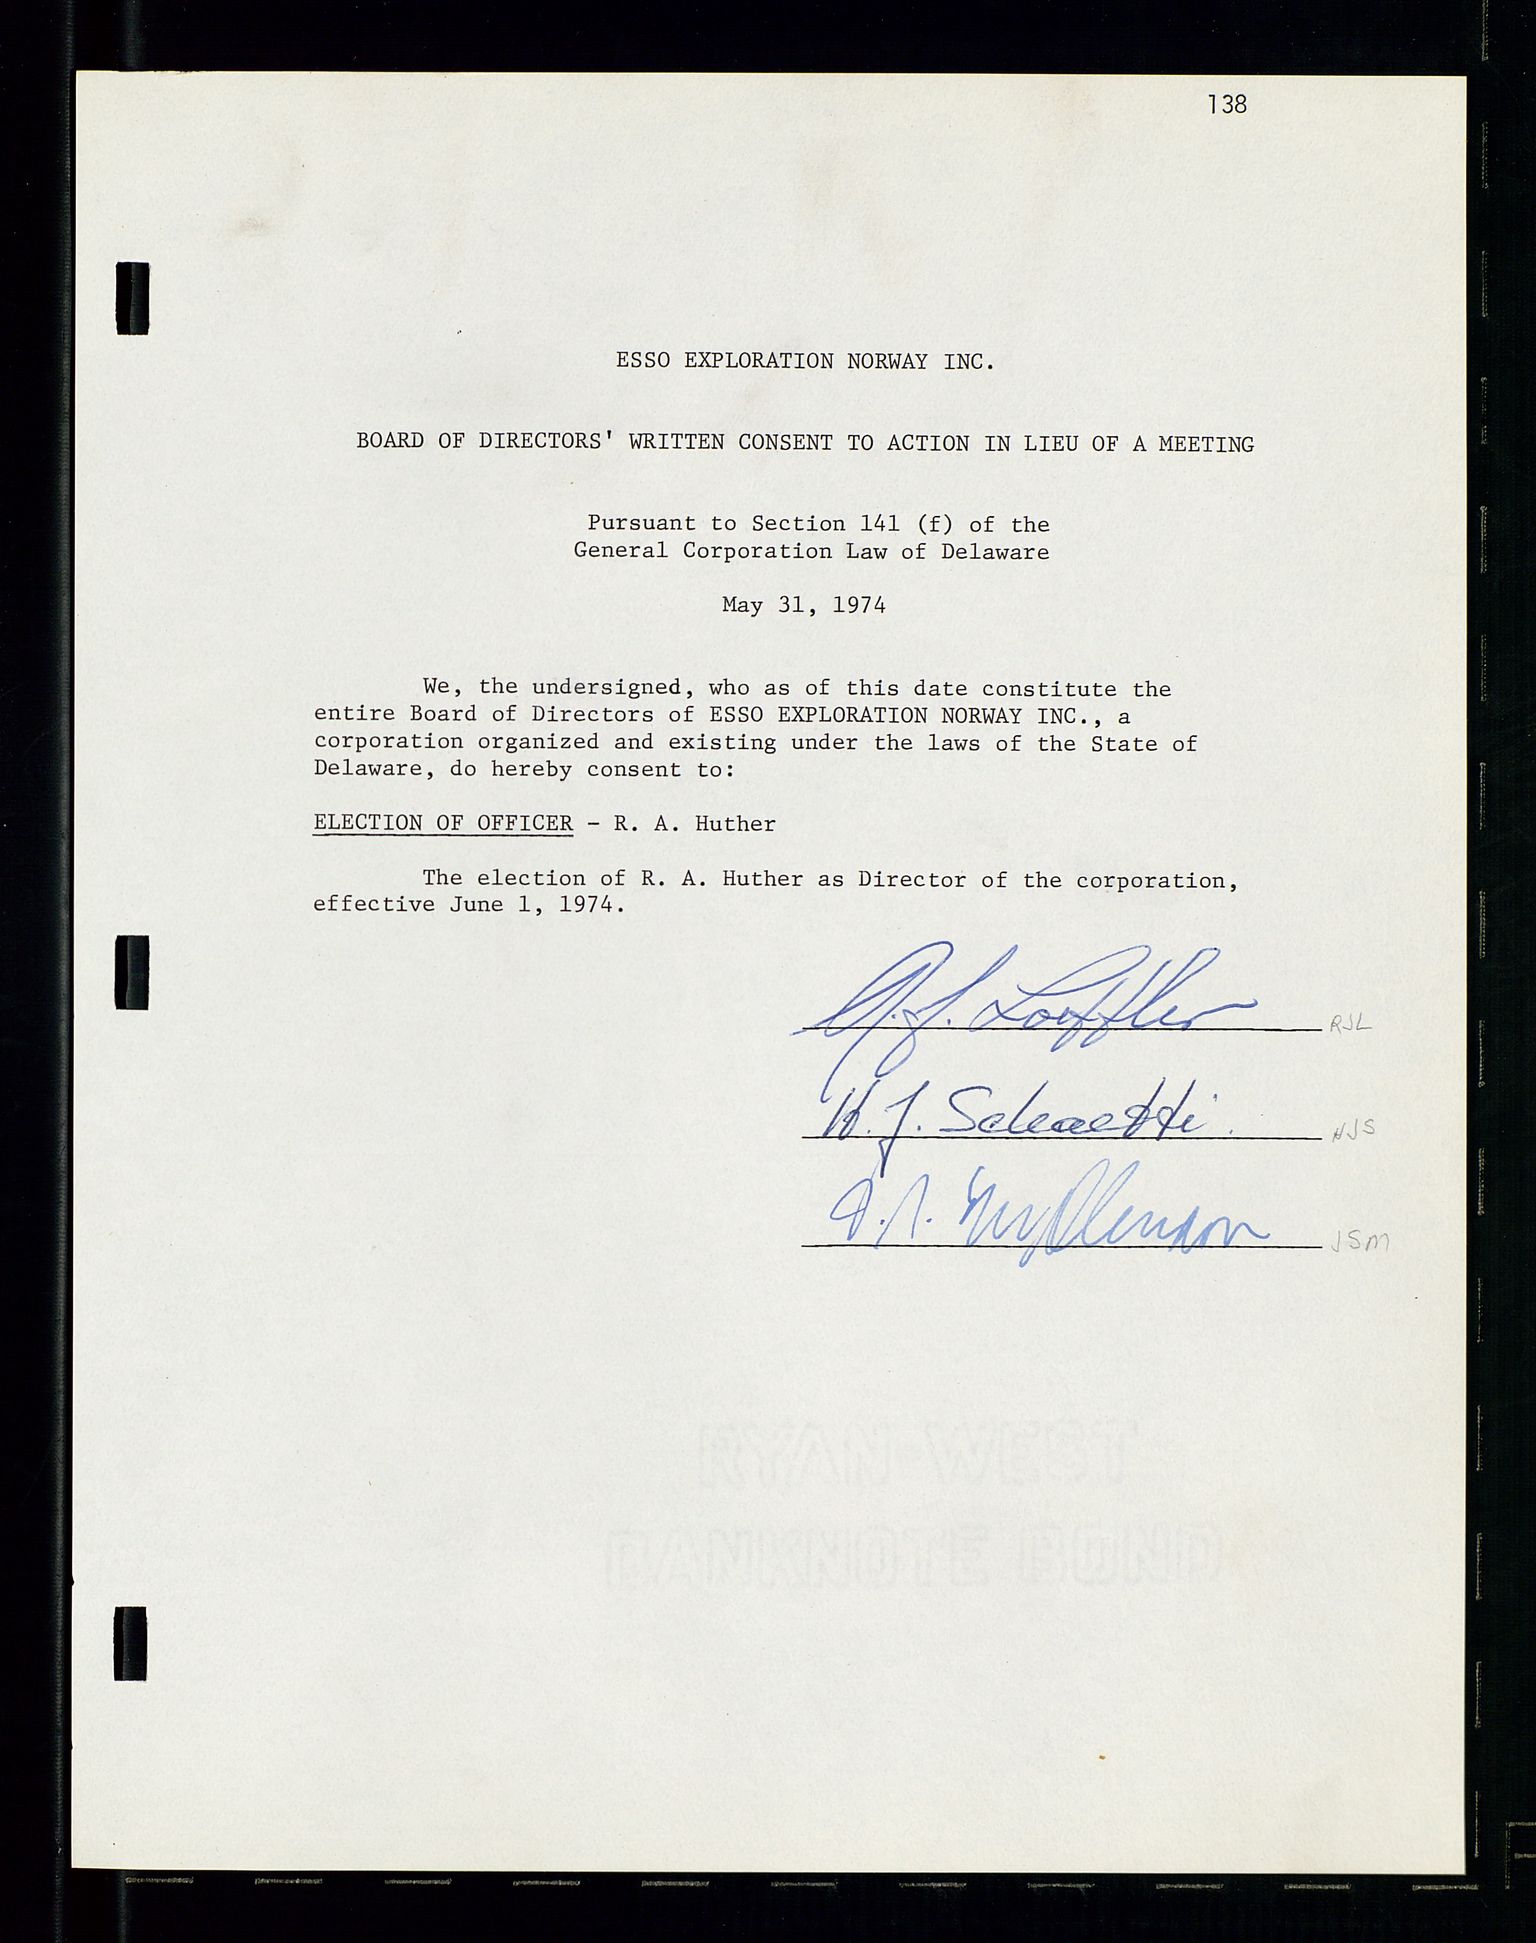 Pa 1512 - Esso Exploration and Production Norway Inc., SAST/A-101917/A/Aa/L0001/0001: Styredokumenter / Corporate records, By-Laws, Board meeting minutes, Incorporations, 1965-1975, s. 138